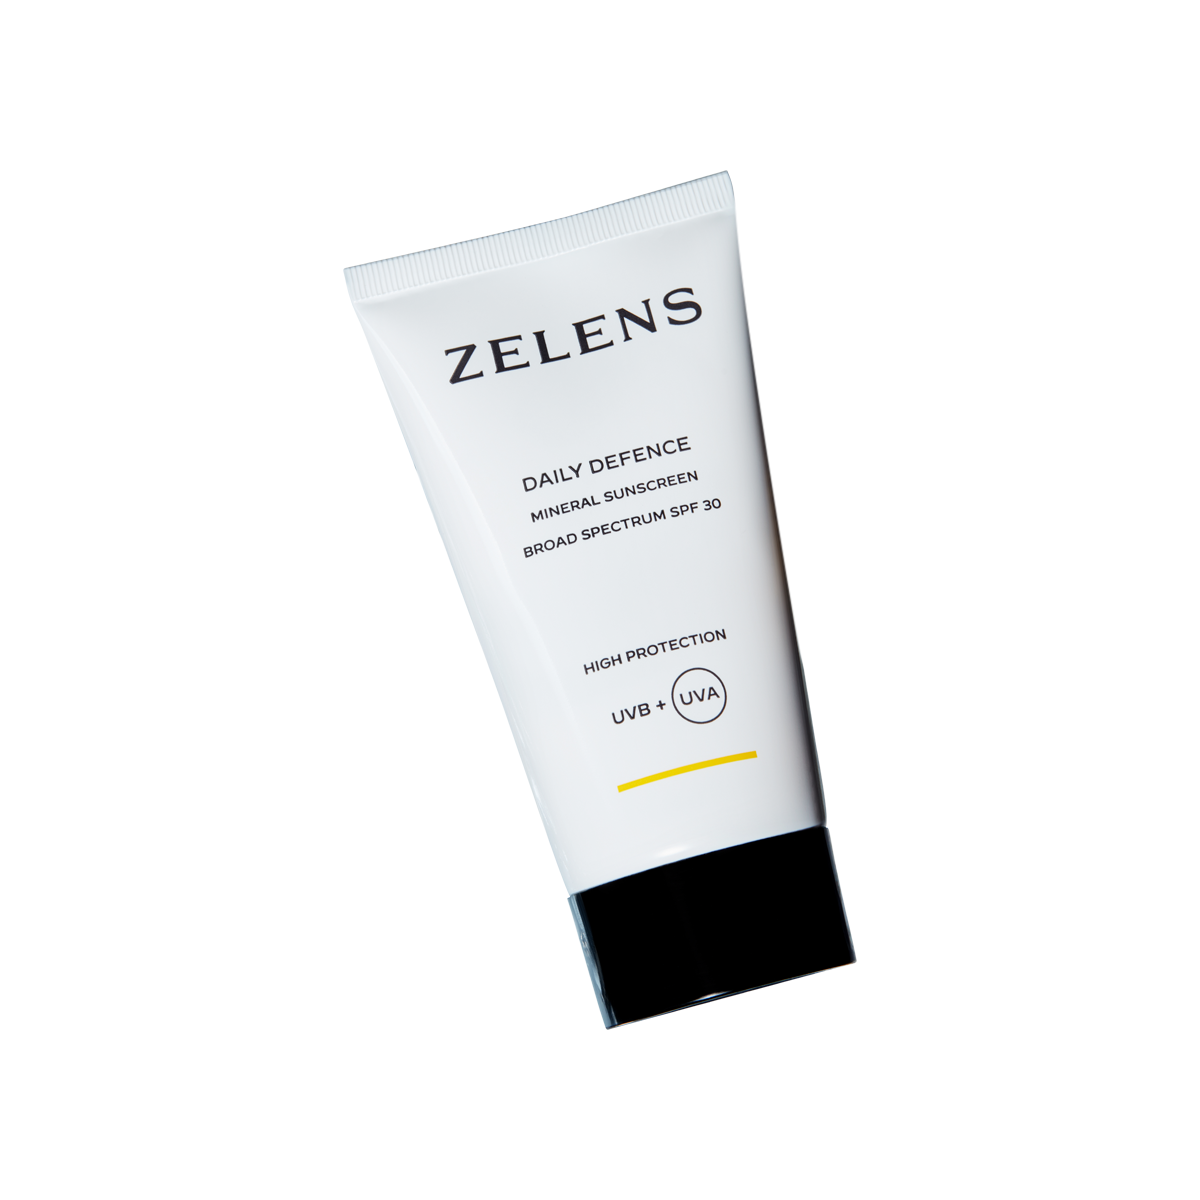 Zelens - Daily Defence Mineral Sunscreen SPF 30